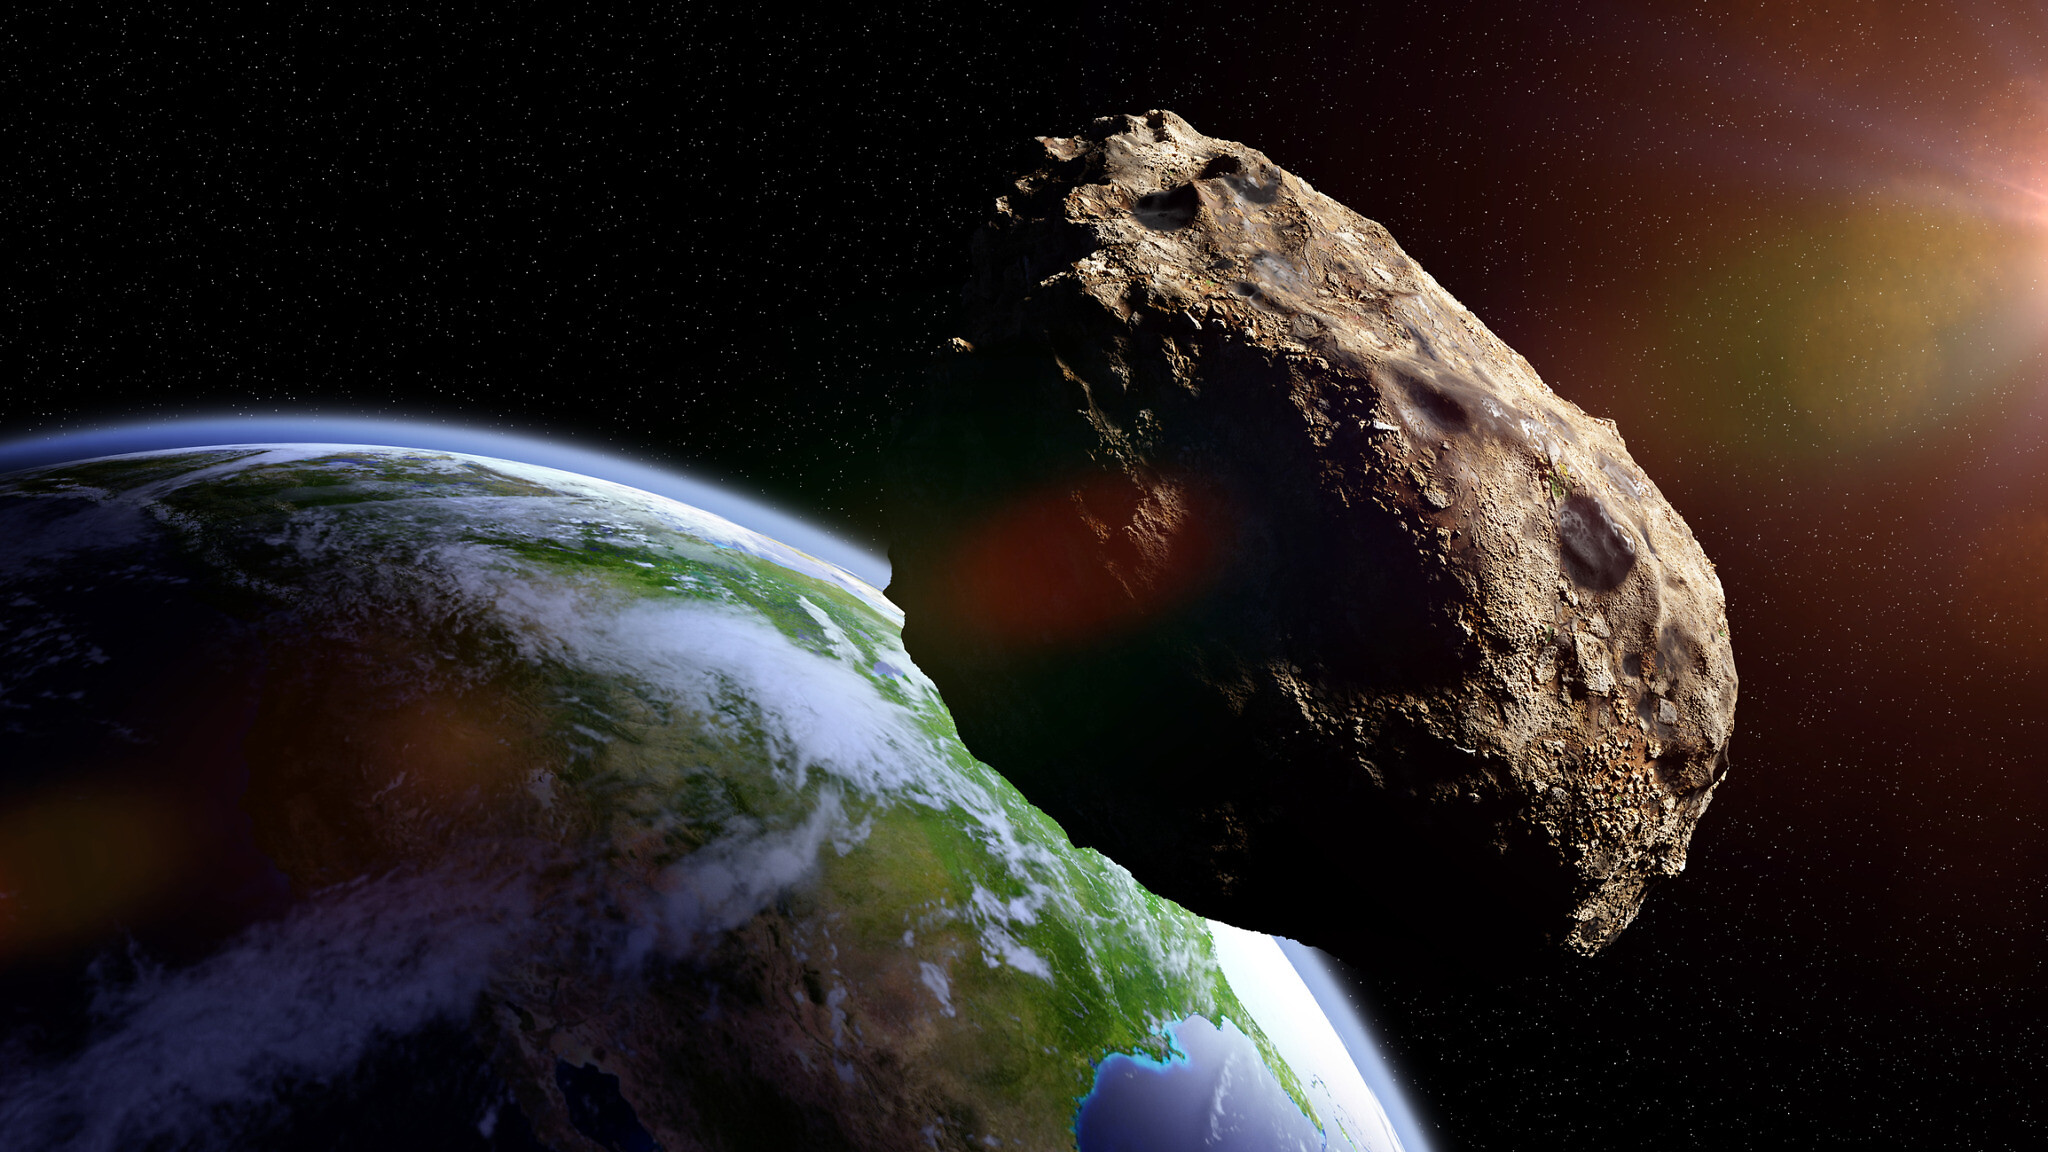 asteroid 2036 collision with earth